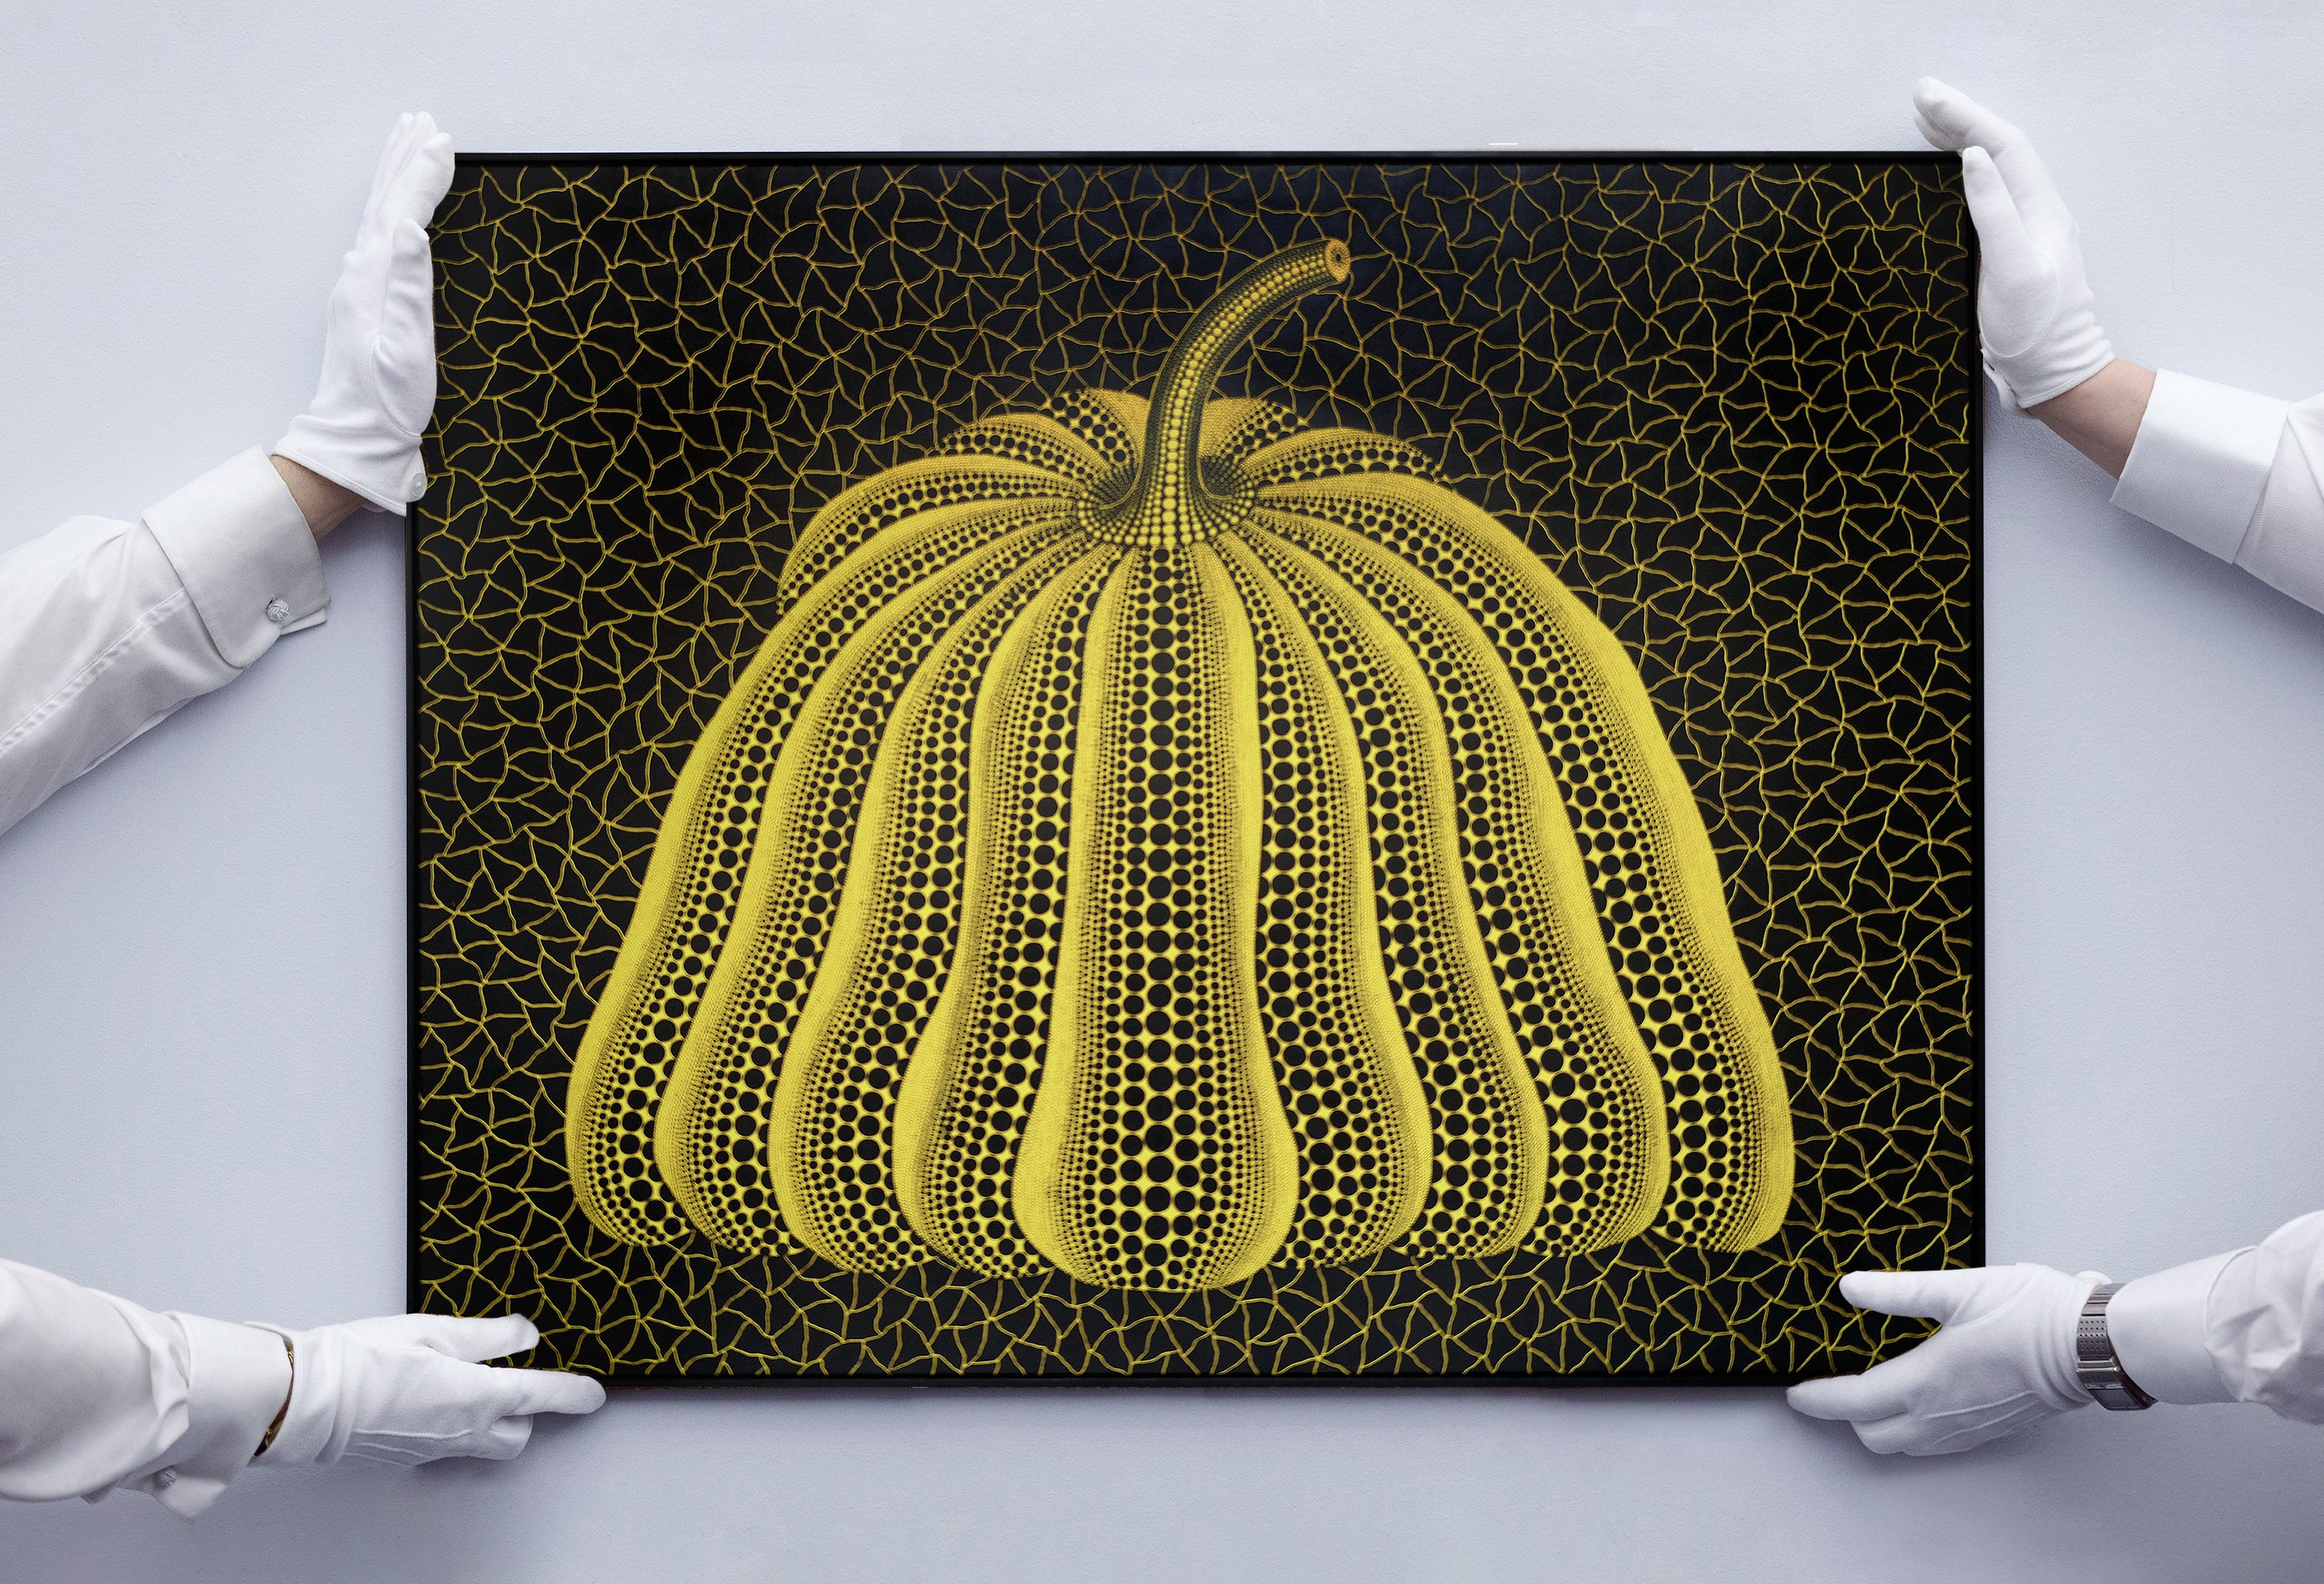 ‘Pumpkin by Yayoi Kusama’ is among the more than $150 million worth of art made available for investment on Masterworks.